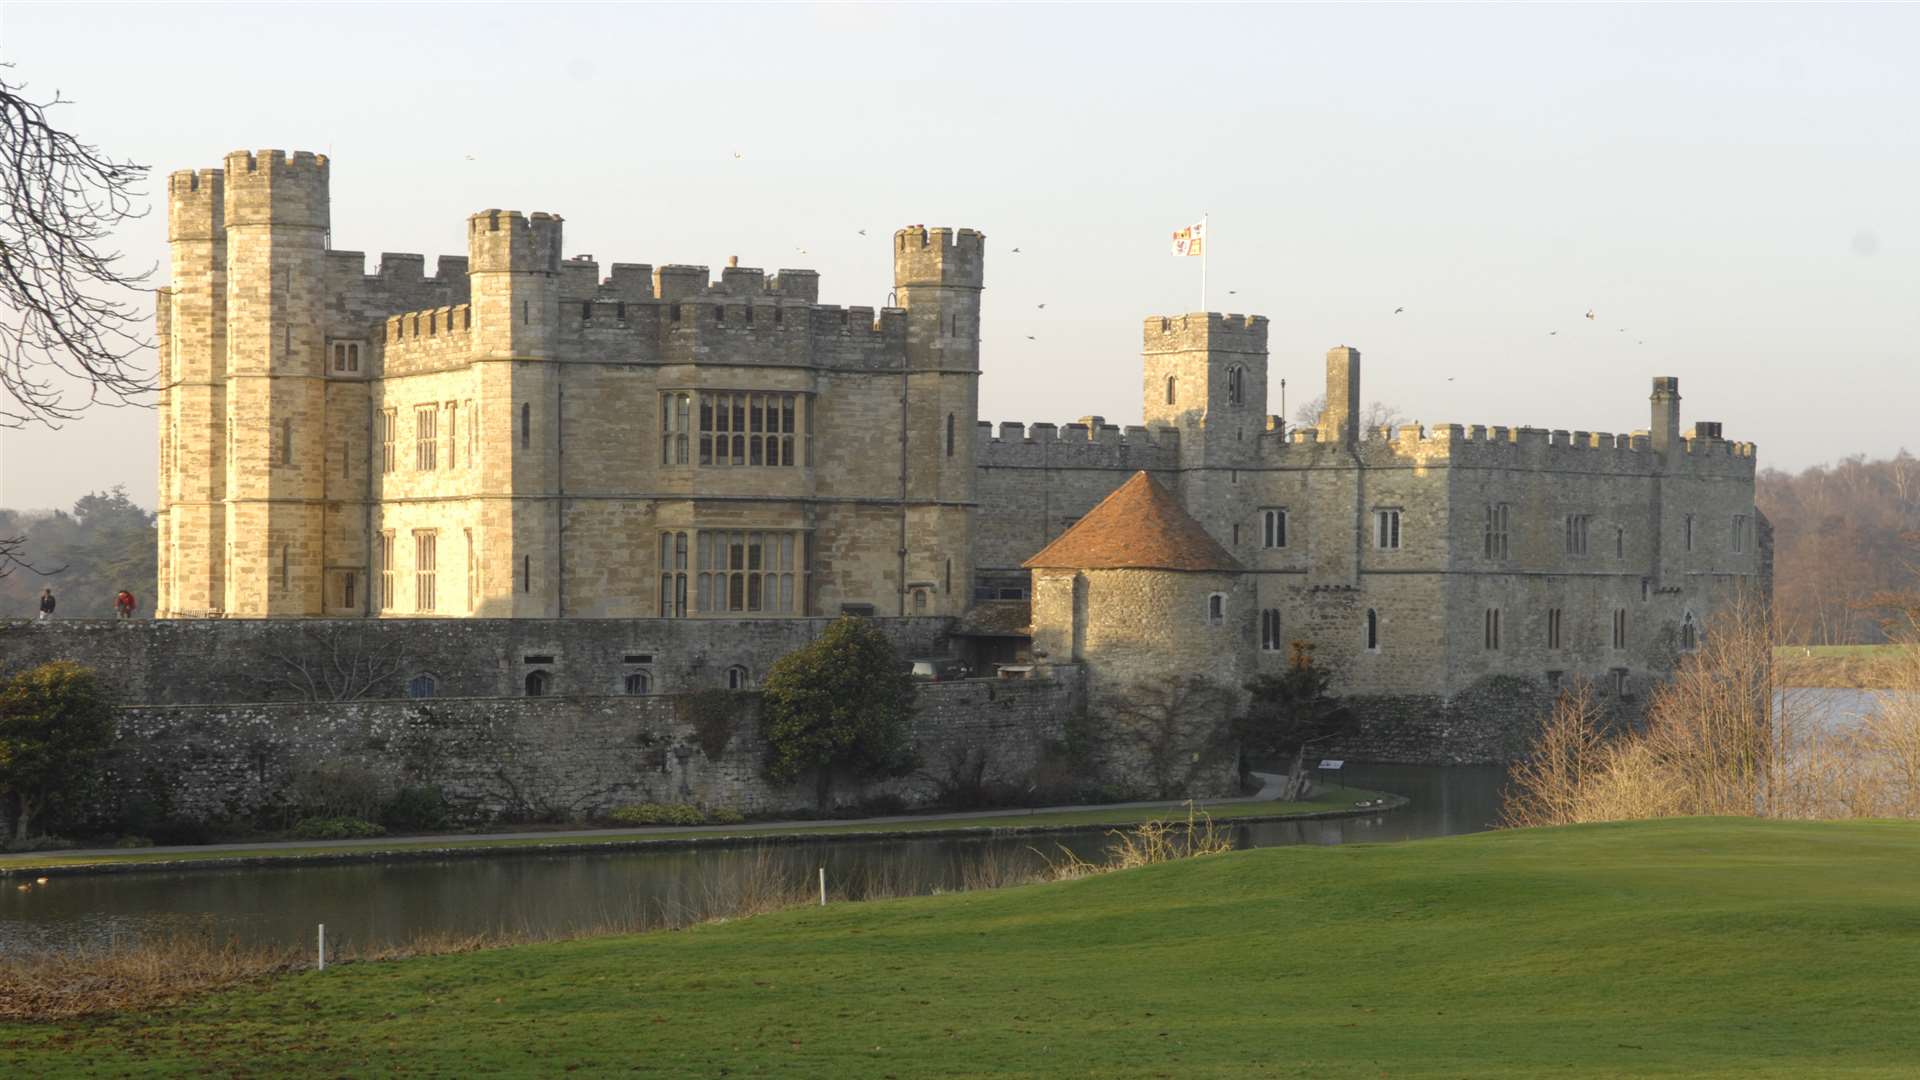 Staff at Leeds Castle have defended their Meet the reindeer event